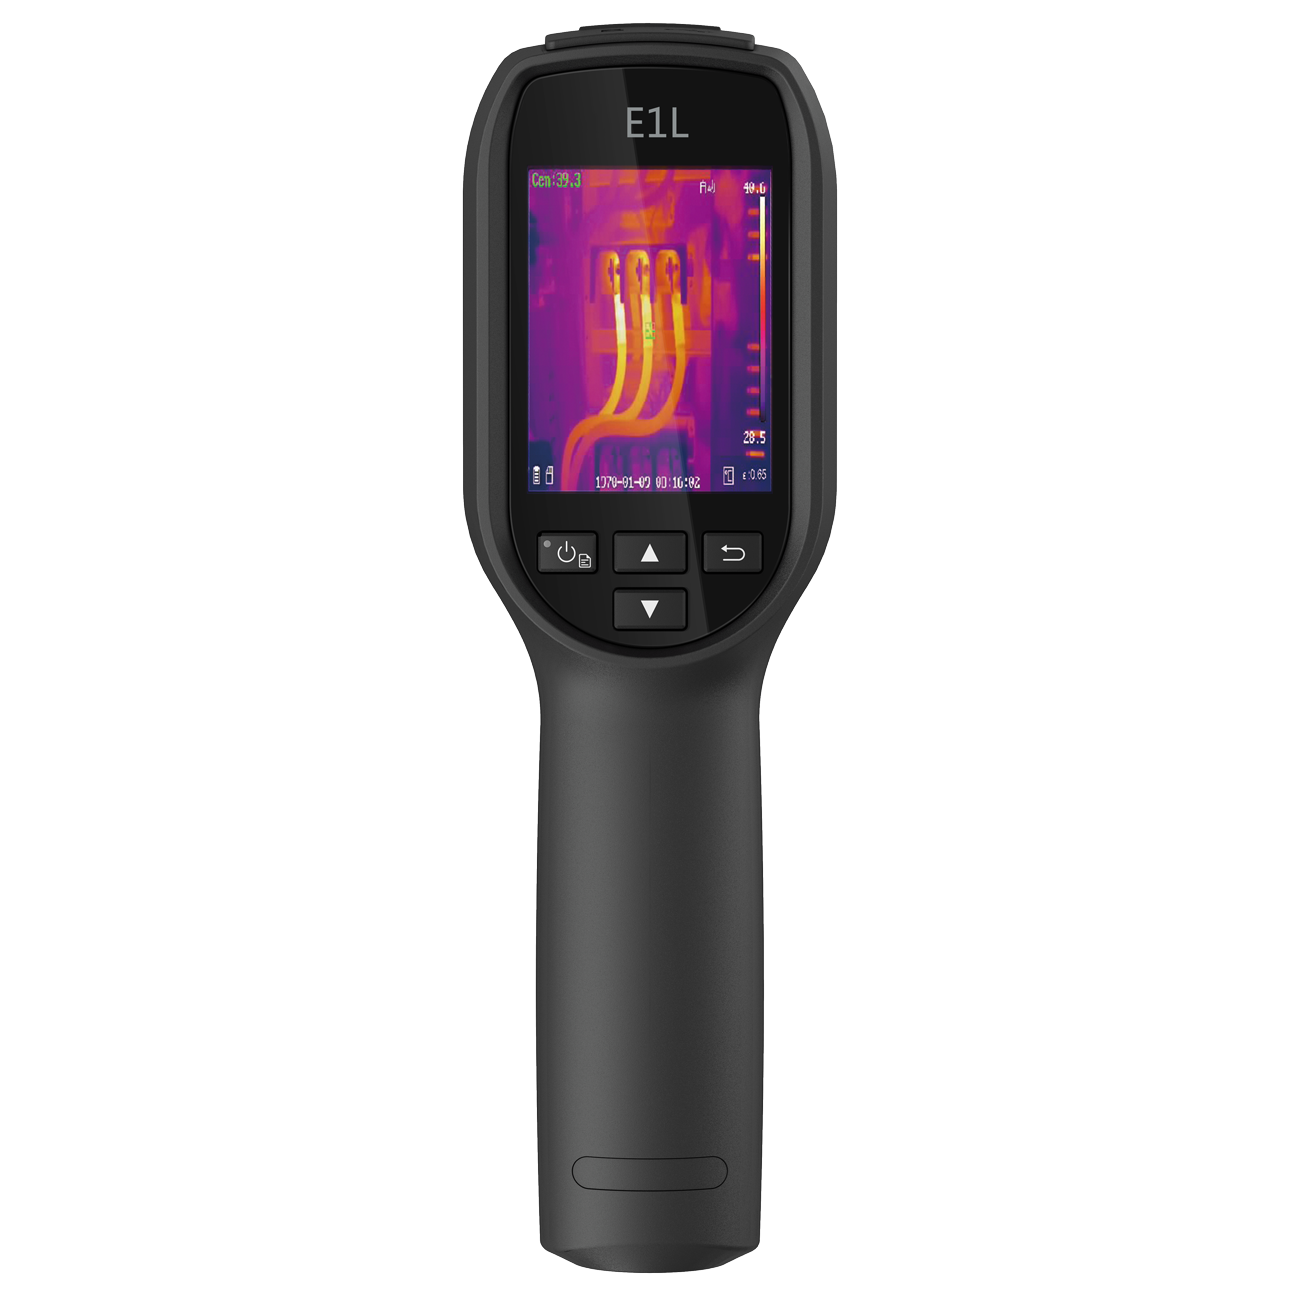 E1L Handheld Thermography Camera